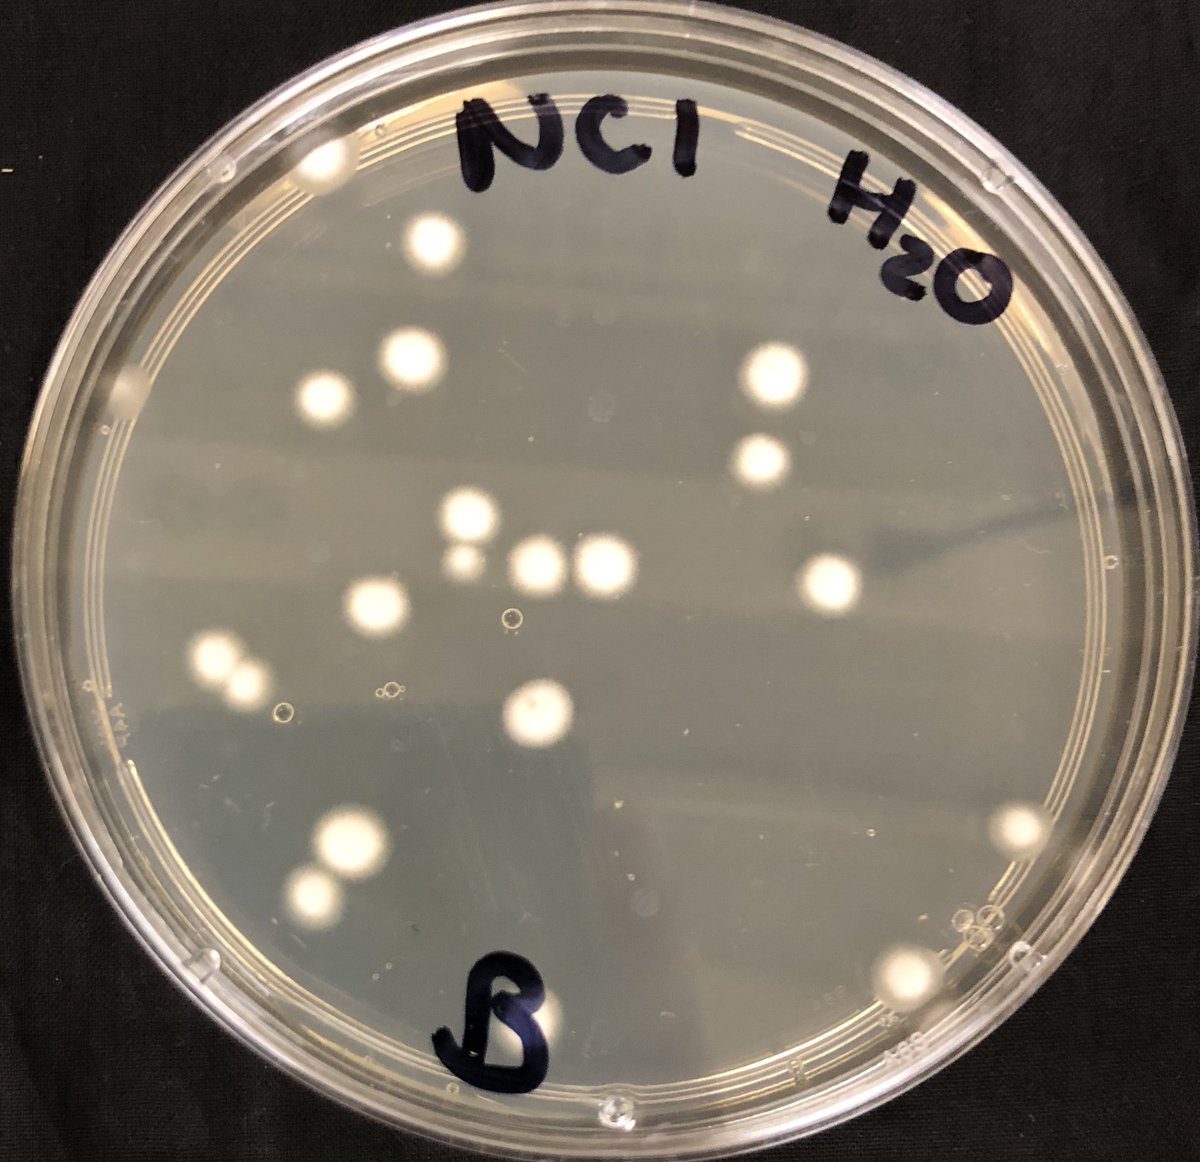 As a check, I also plated some of the old water and new water to see if any fungi were kicking around. The results confirmed what i had already suspected: the water was harboring a white fungus. The source was the water not the cicada!!!